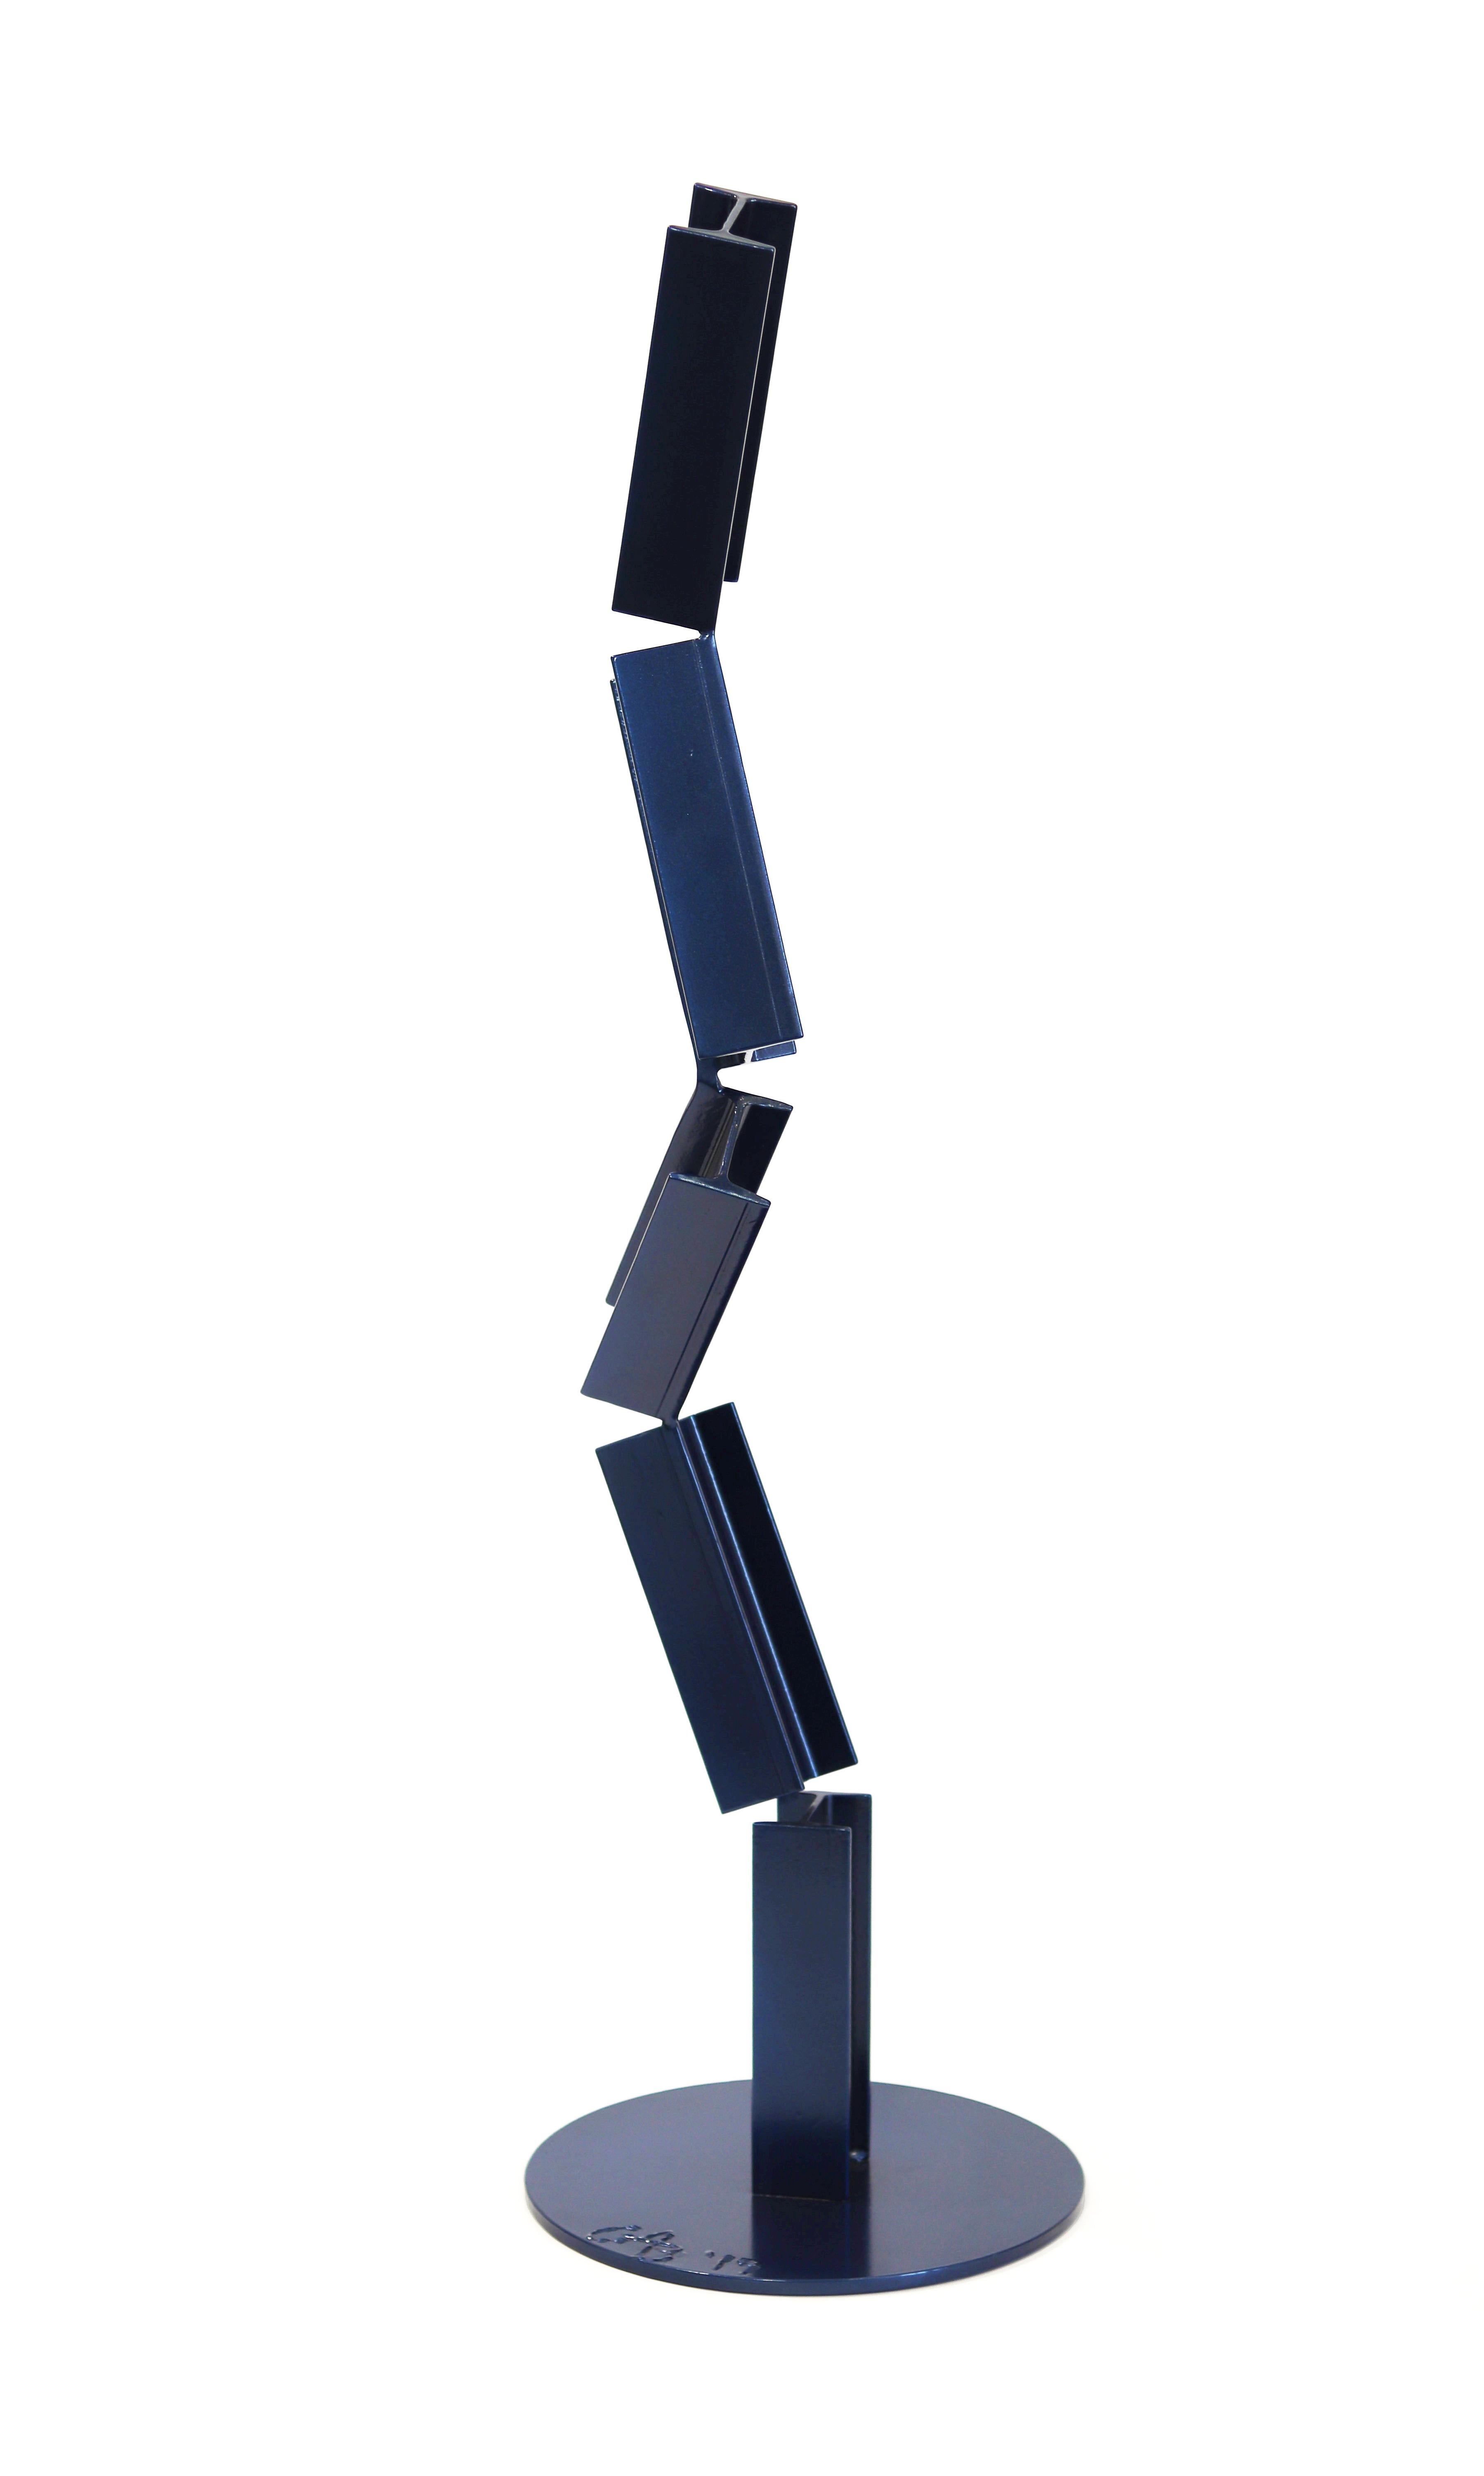 Granville Beals Abstract Sculpture - Oh So Blue - Tall Modern Large Contemporary Abstract Minimalism Steel Sculpture